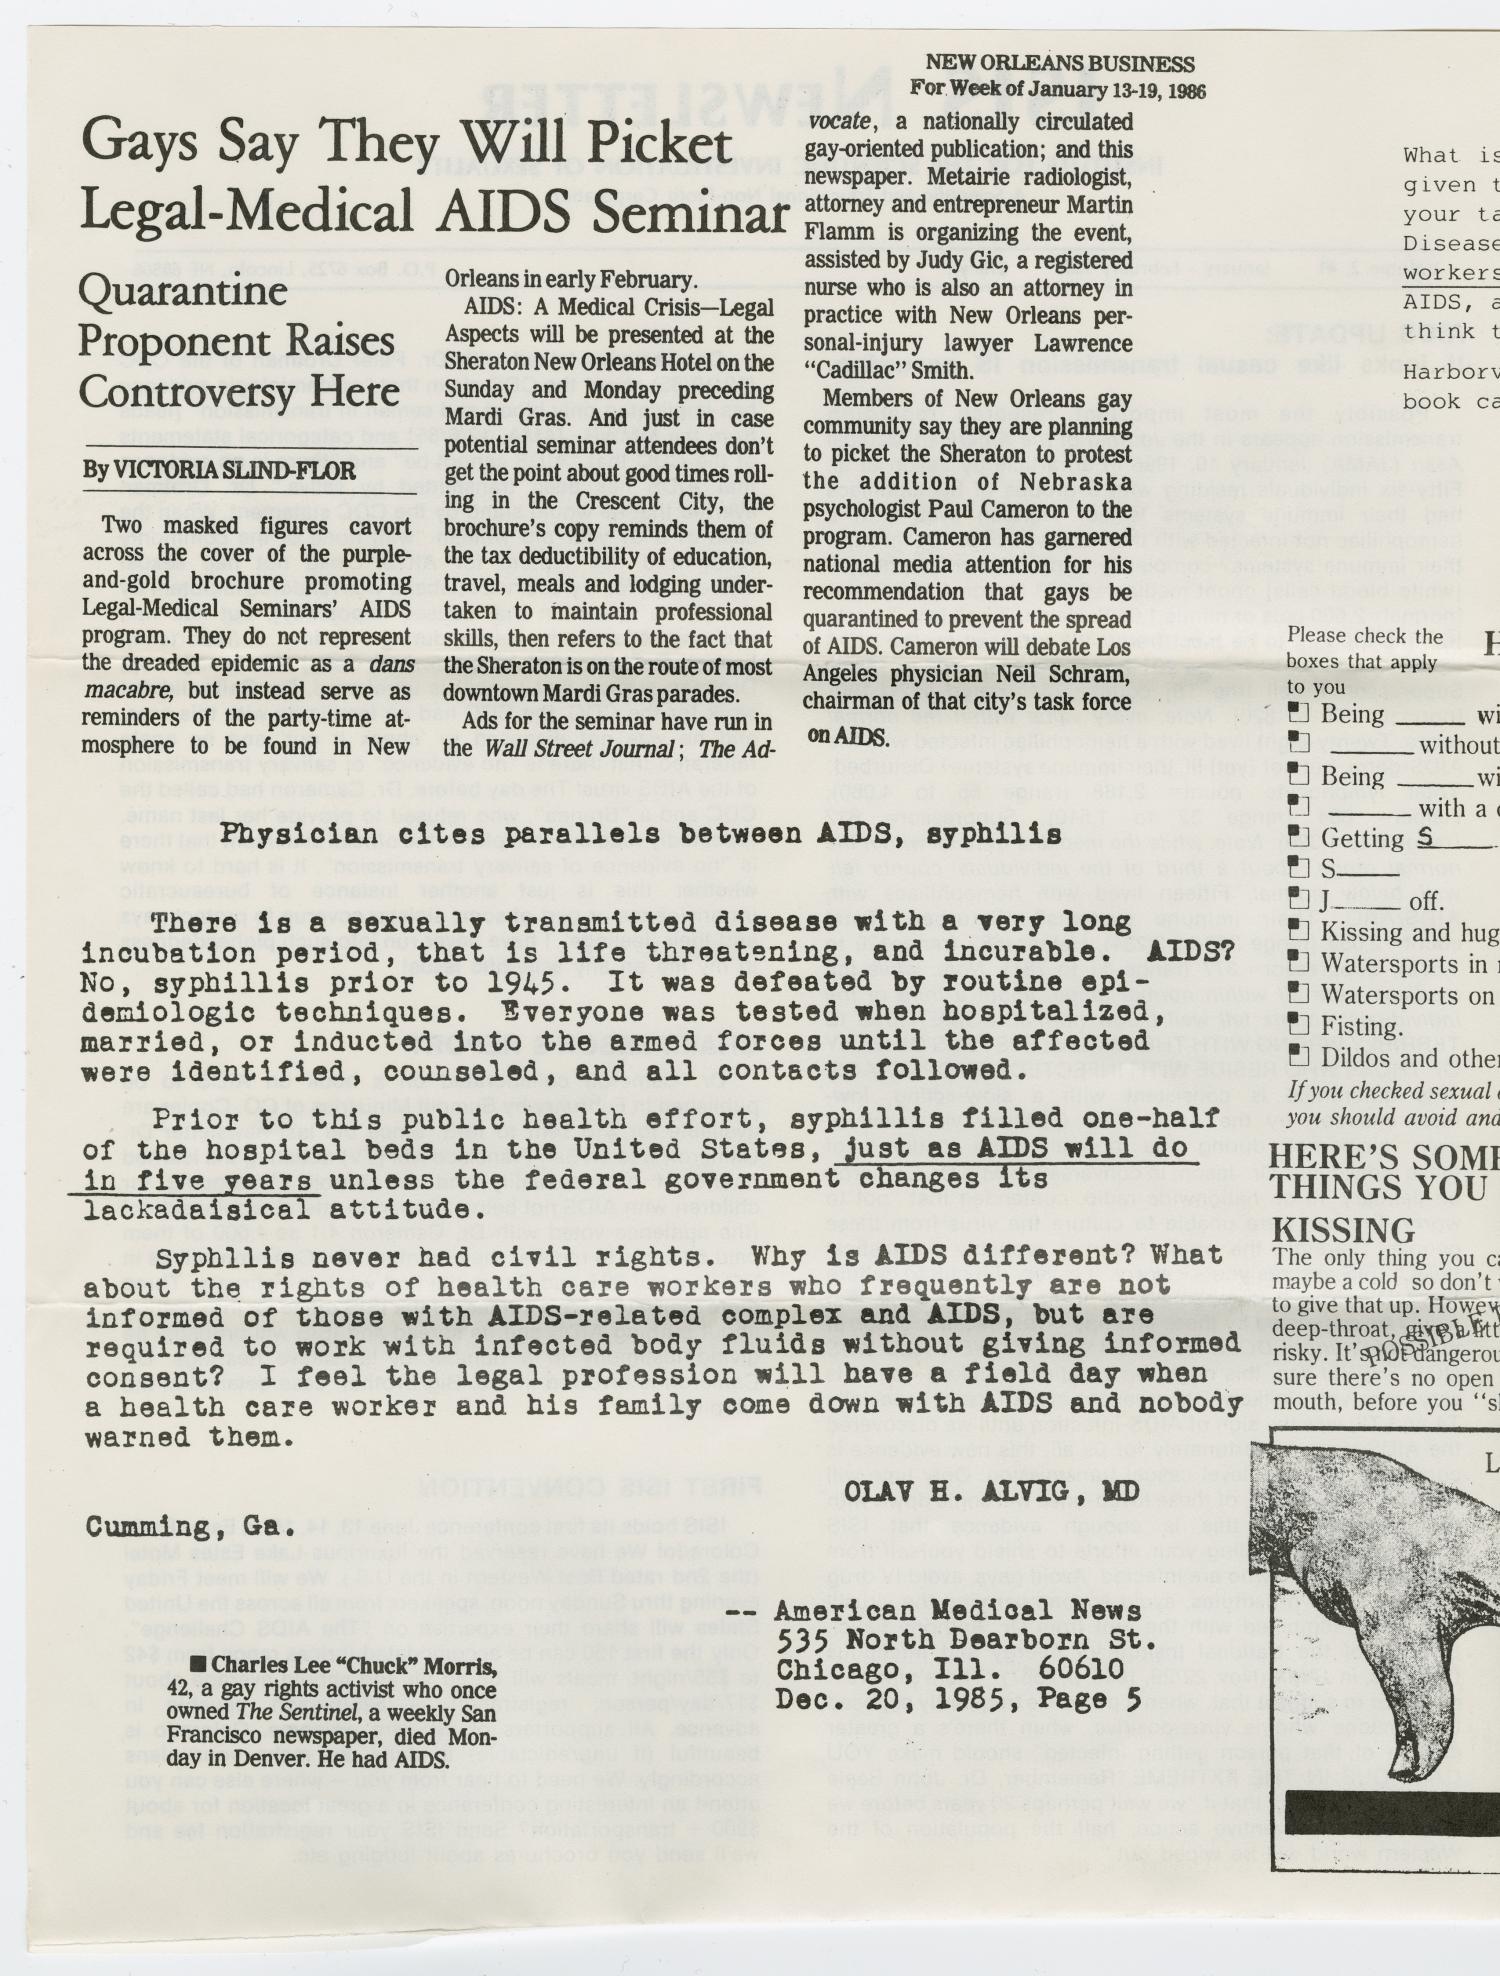 ISIS Newsletter, Volume 2, Number 1, January-February 1986
                                                
                                                    [Sequence #]: 2 of 4
                                                